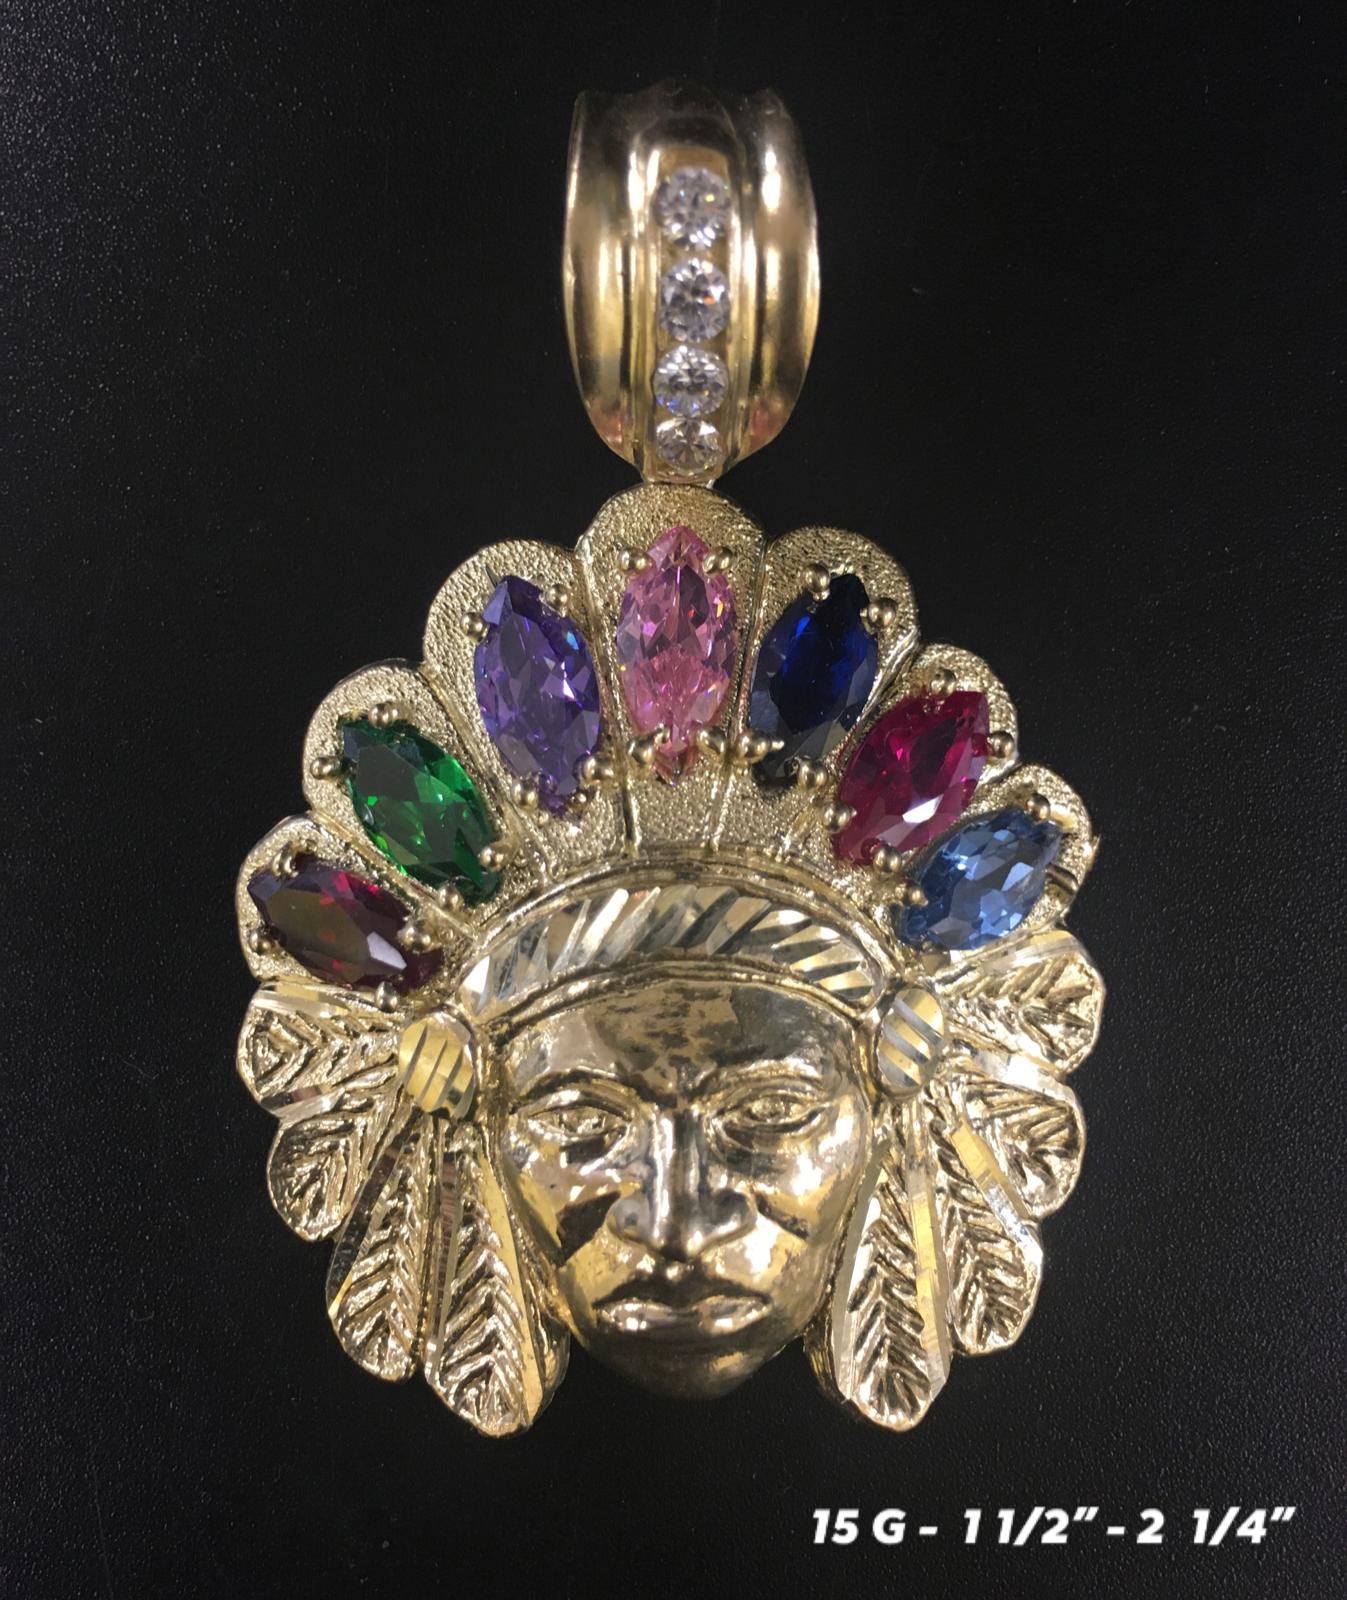 Native American Head with colorful stones pendant 10K solid gold